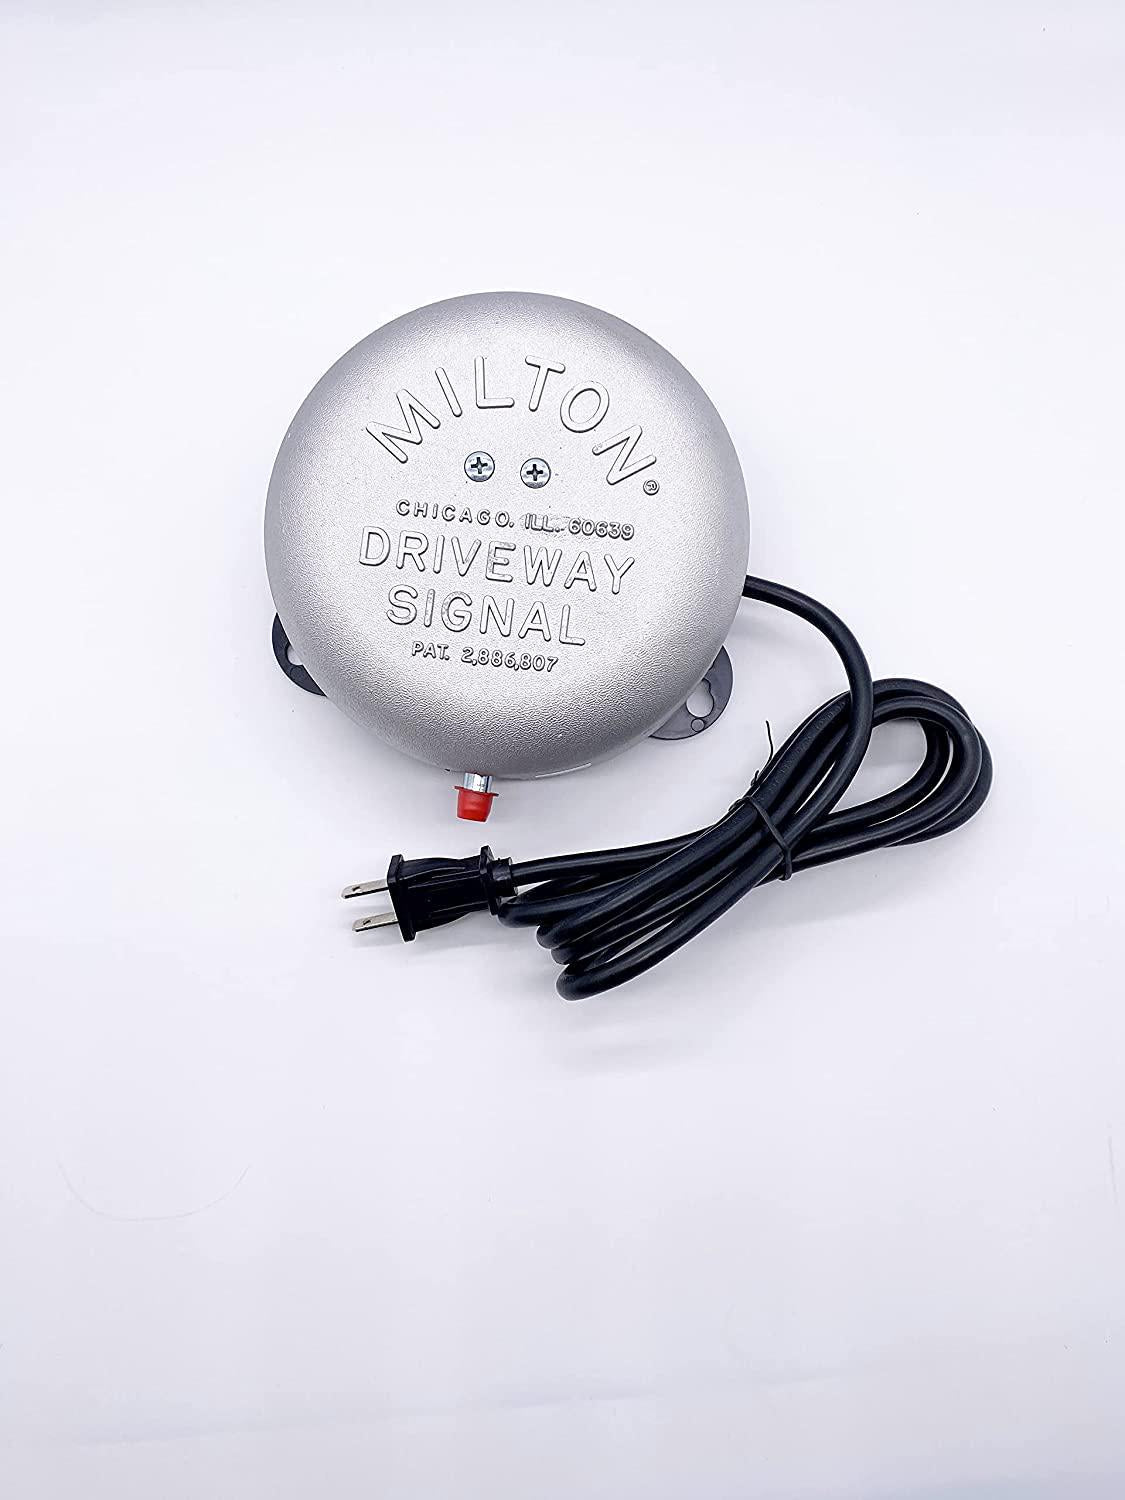 Milton, Milton Bells Driveway Bell Kit with 25' Signal Hose for Drive-thru, Residential, or Industrial Driveway Alarms